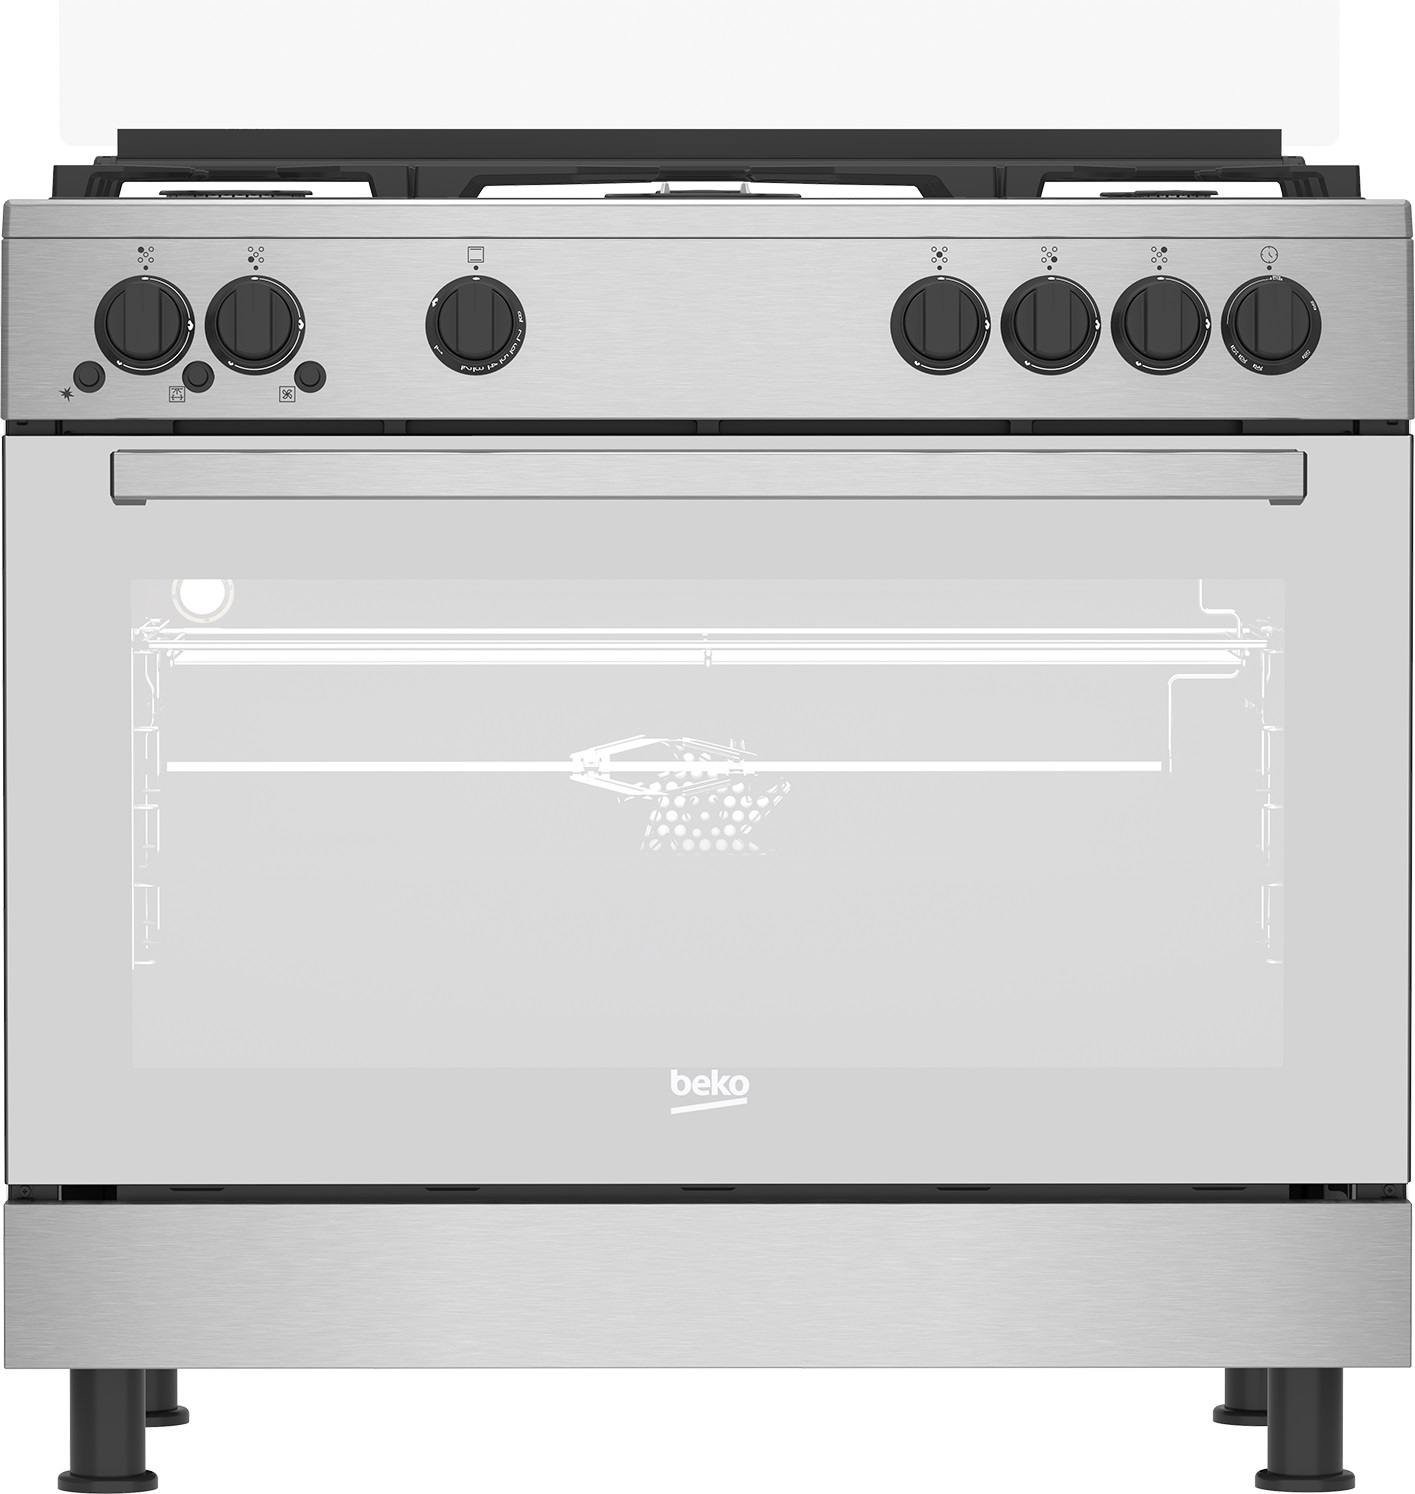 Beko Gas Cooker, 5 Burners, Stainless Steel- GGR 15115 DX NS